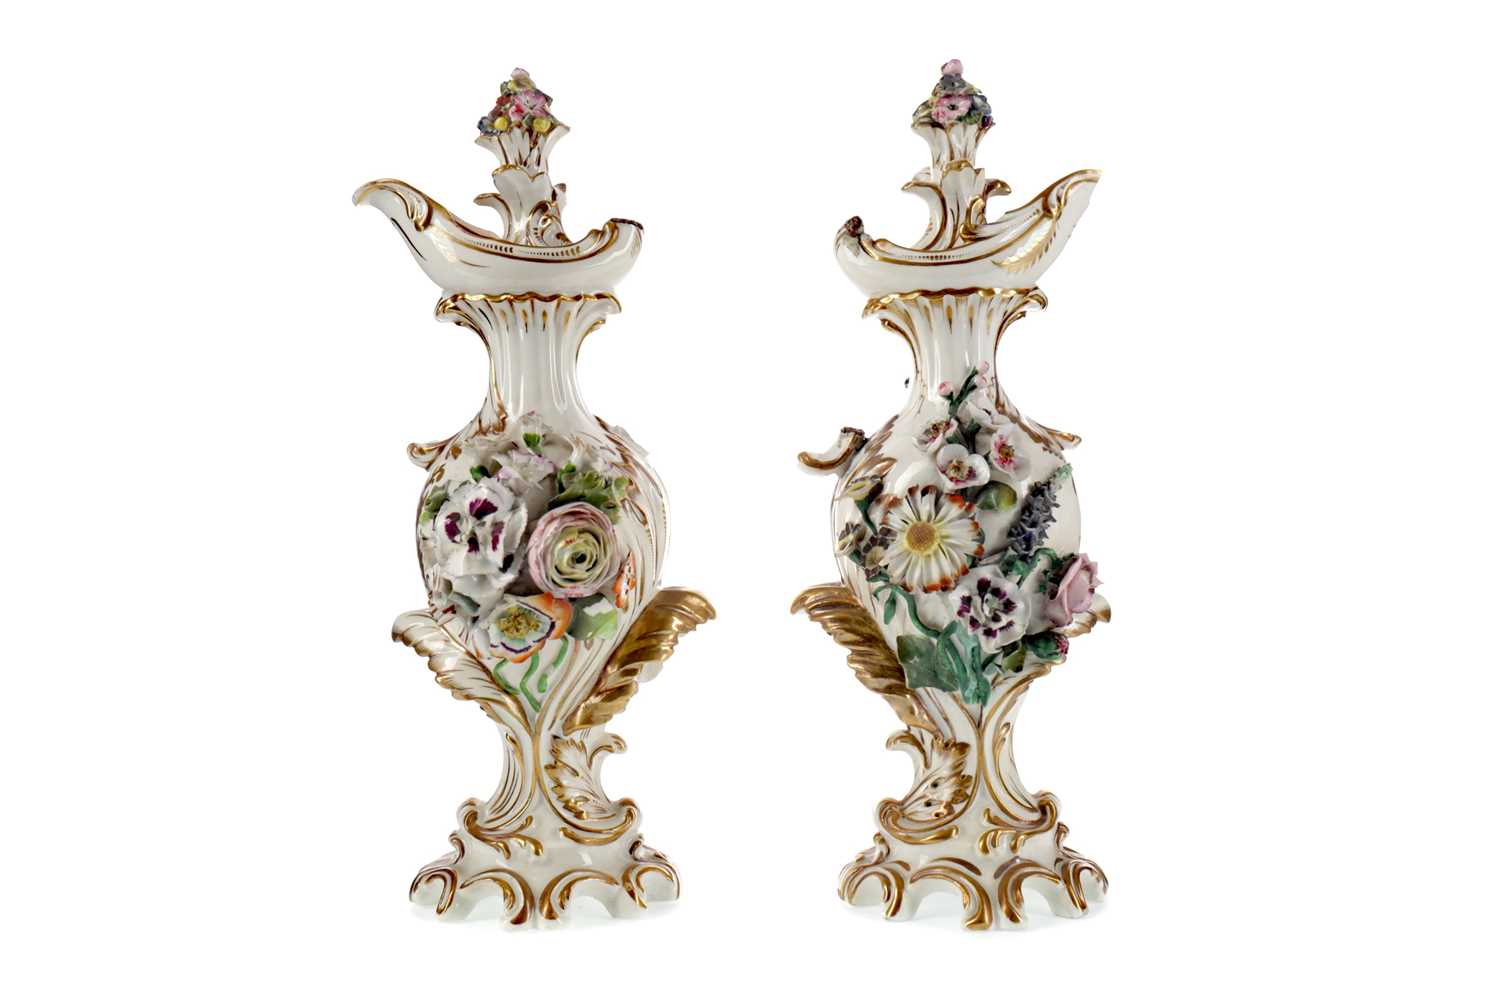 Lot 68 - A PAIR OF EARLY 19TH CENTURY DERBY PORCELAIN EWERS AND STOPPERS